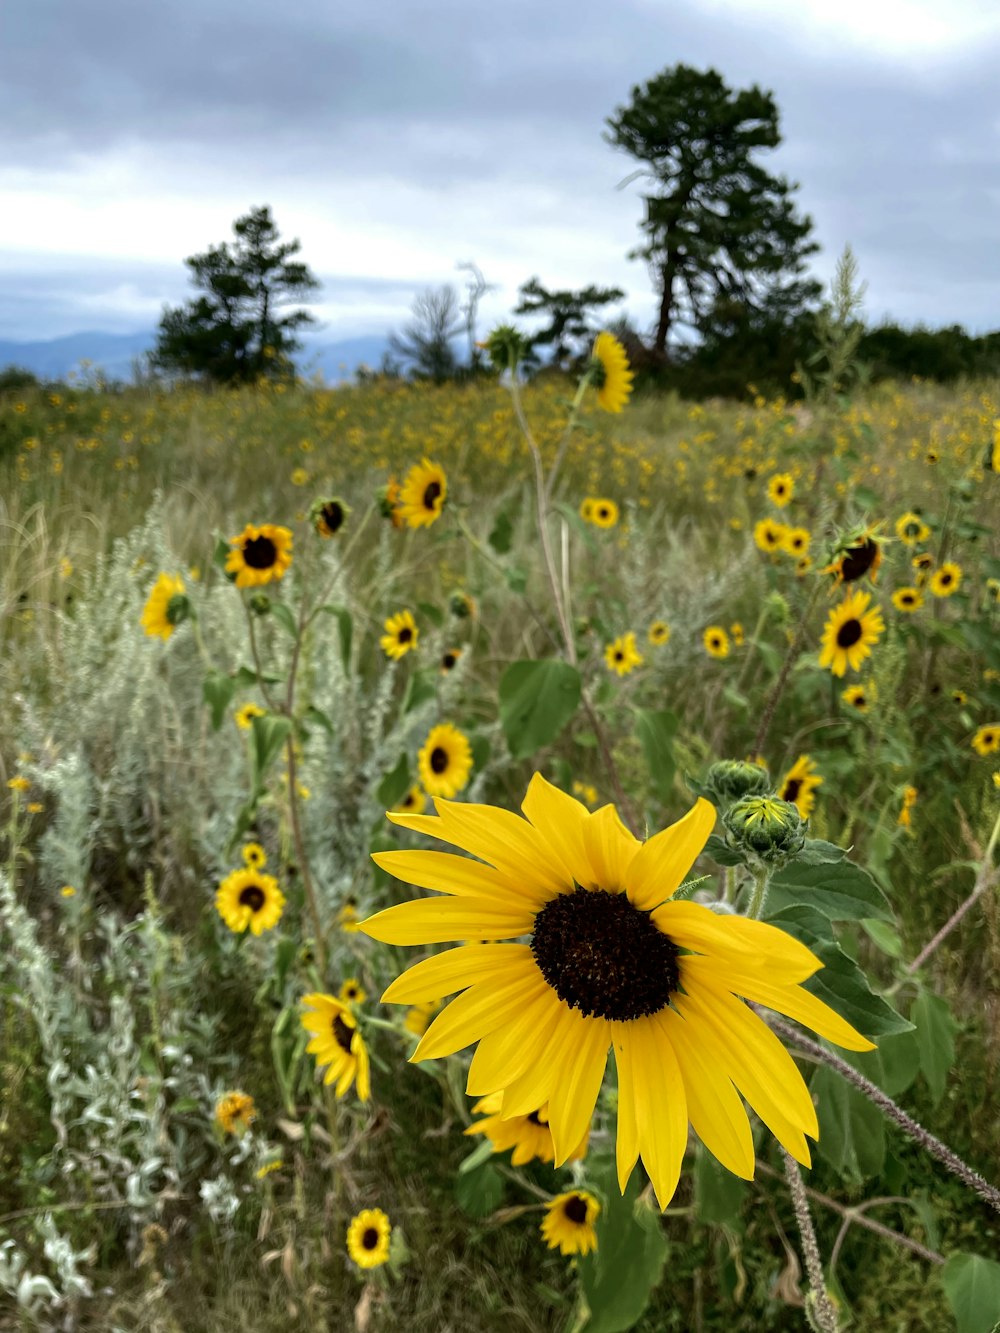 a field of sunflowers with a cloudy sky in the background